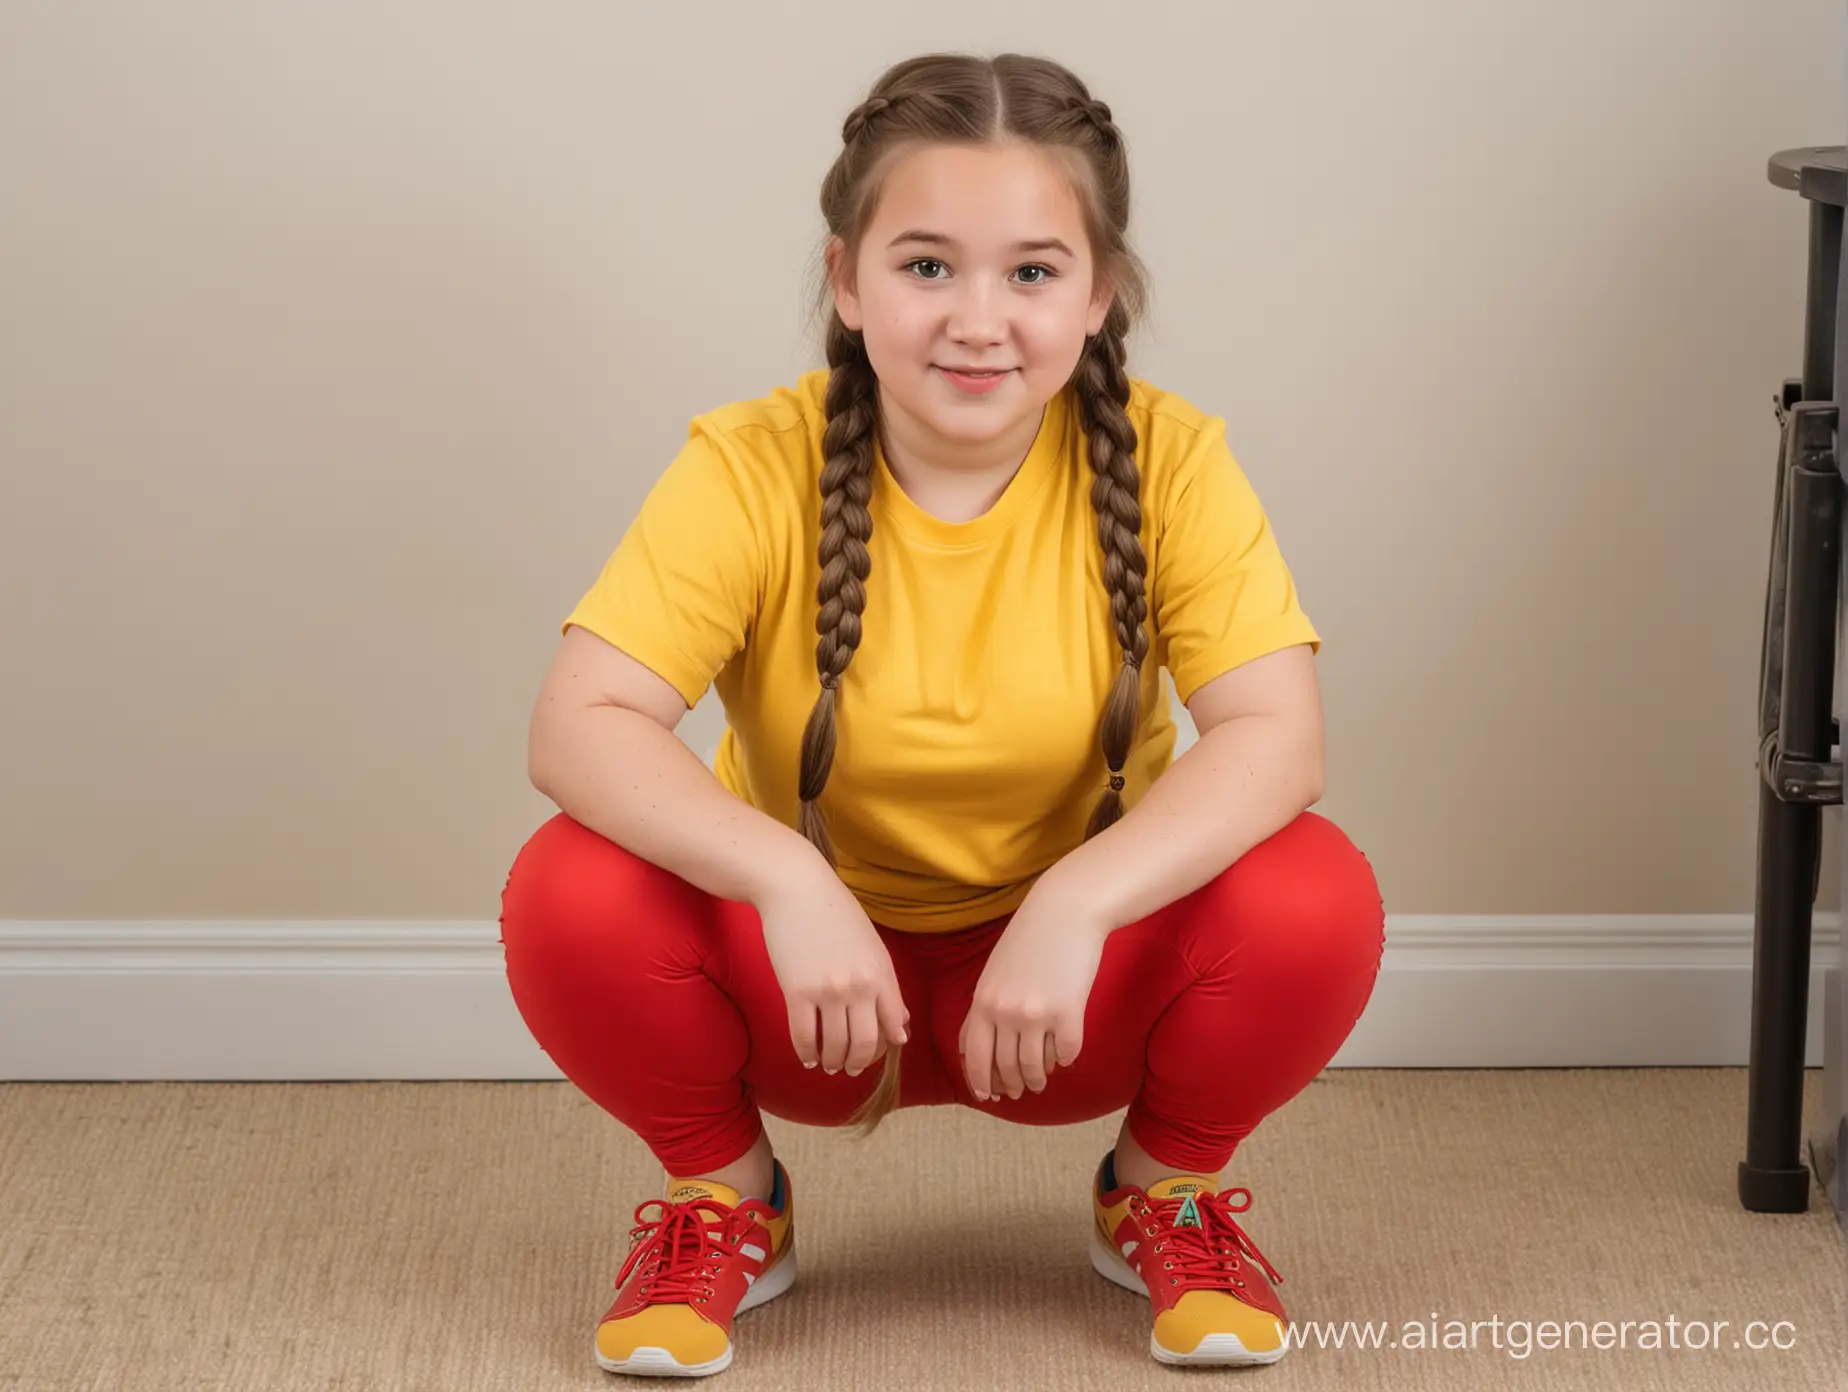 Adorable-Chubby-Girl-with-Braids-Squatting-in-Red-Leggings-and-Yellow-TShirt